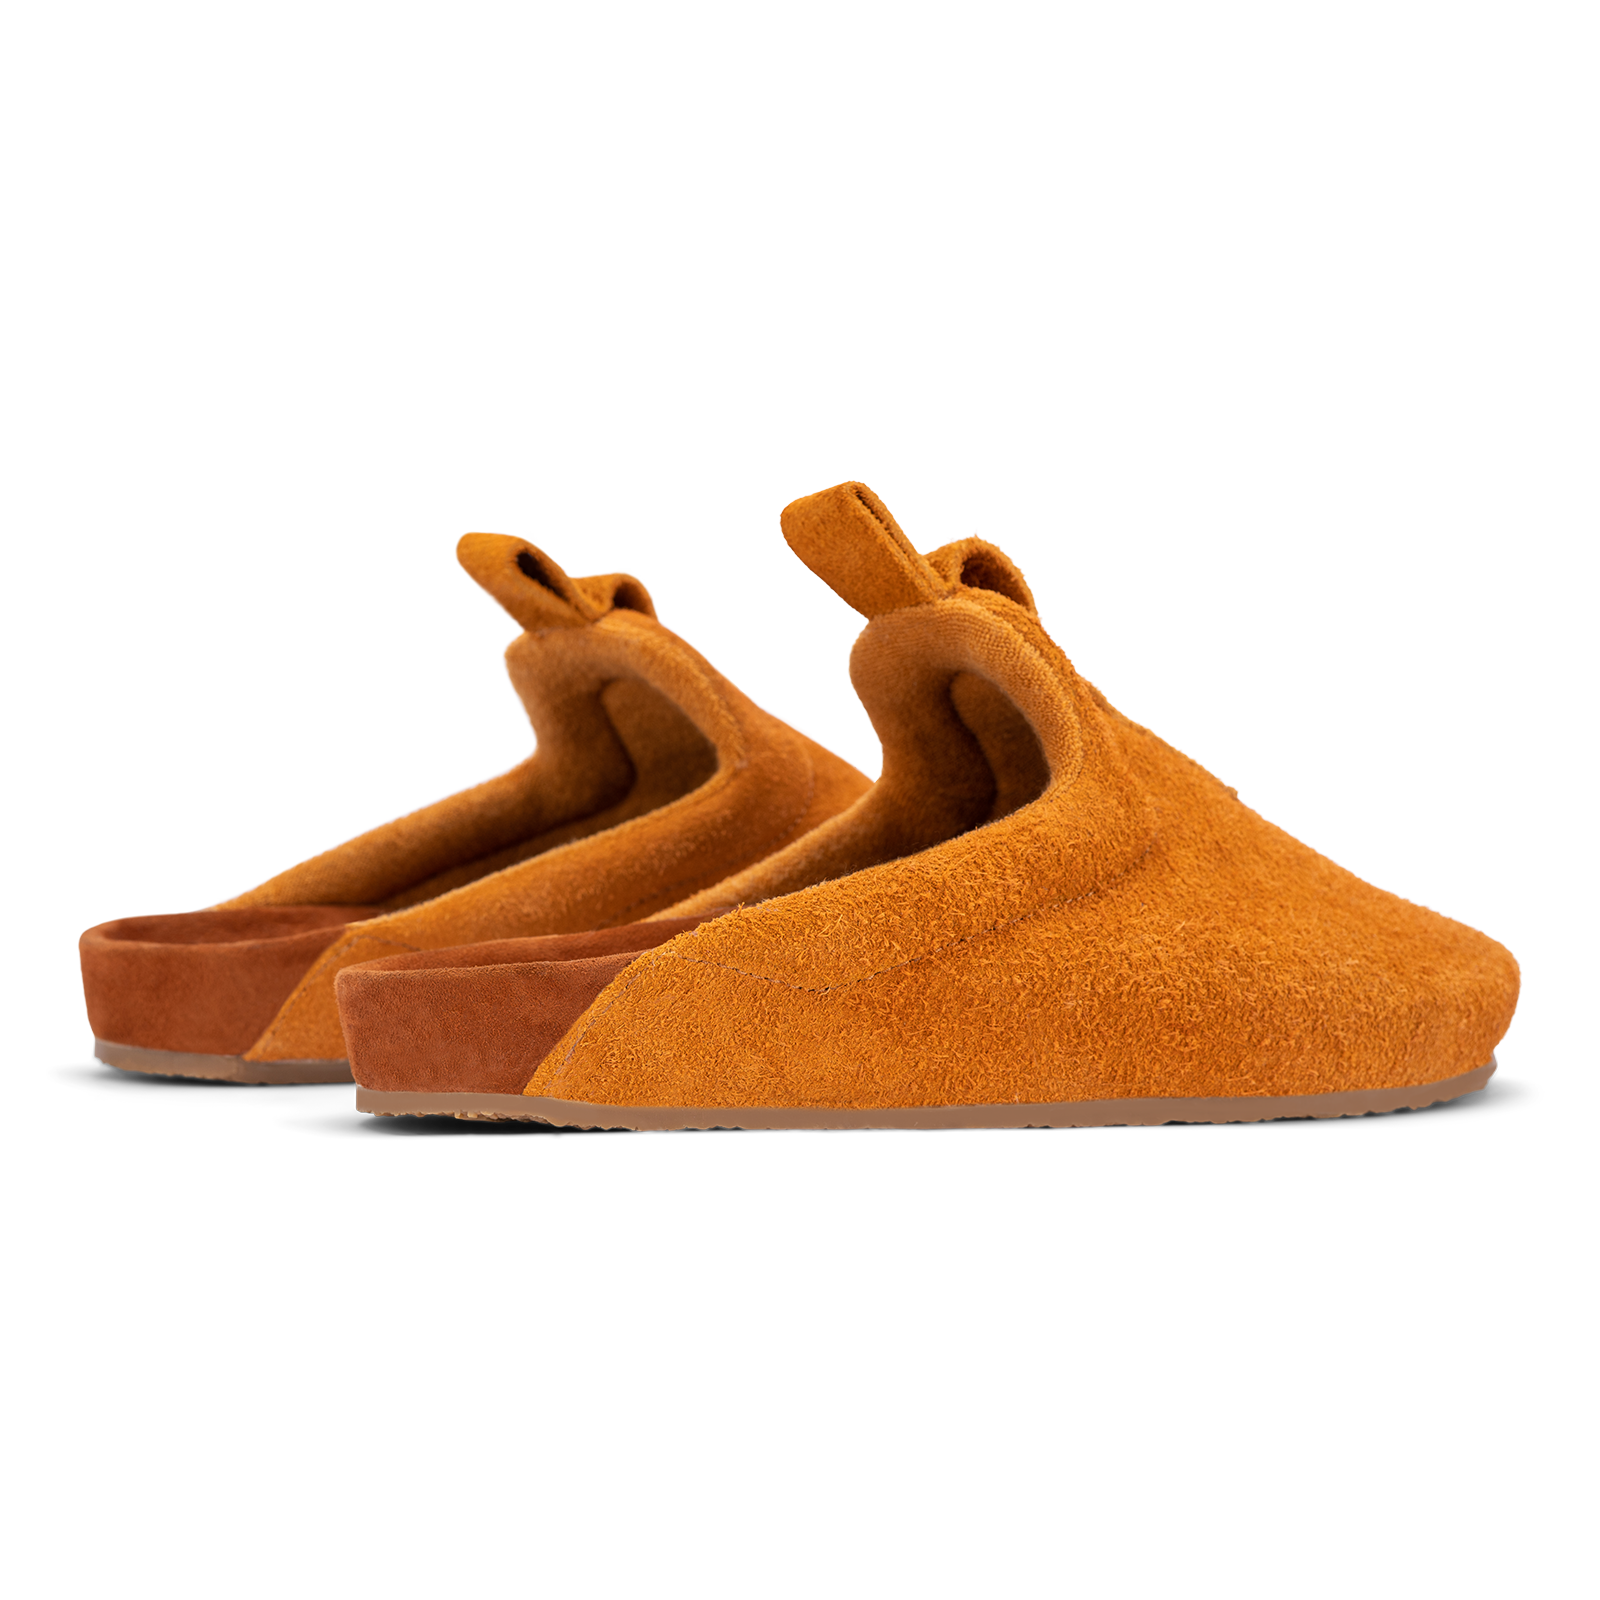 Back 3/4 view Brownish Orange suede upper, cork midsole wrapped in soft suede, Vibram sheet gum rubber outsole